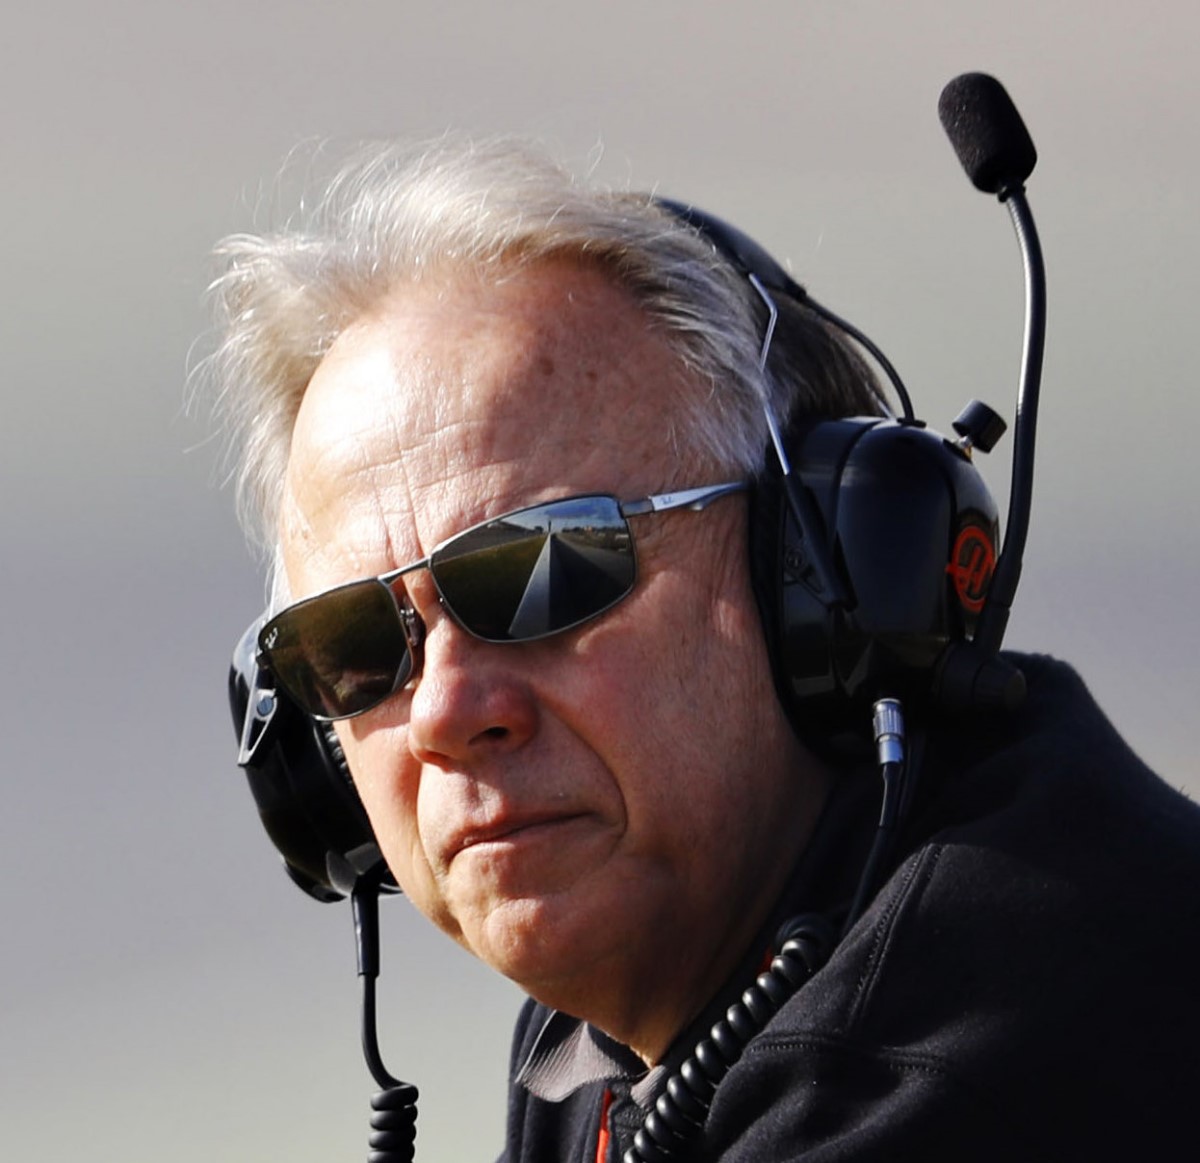 Haas quickly learning the bias against Americans in F1